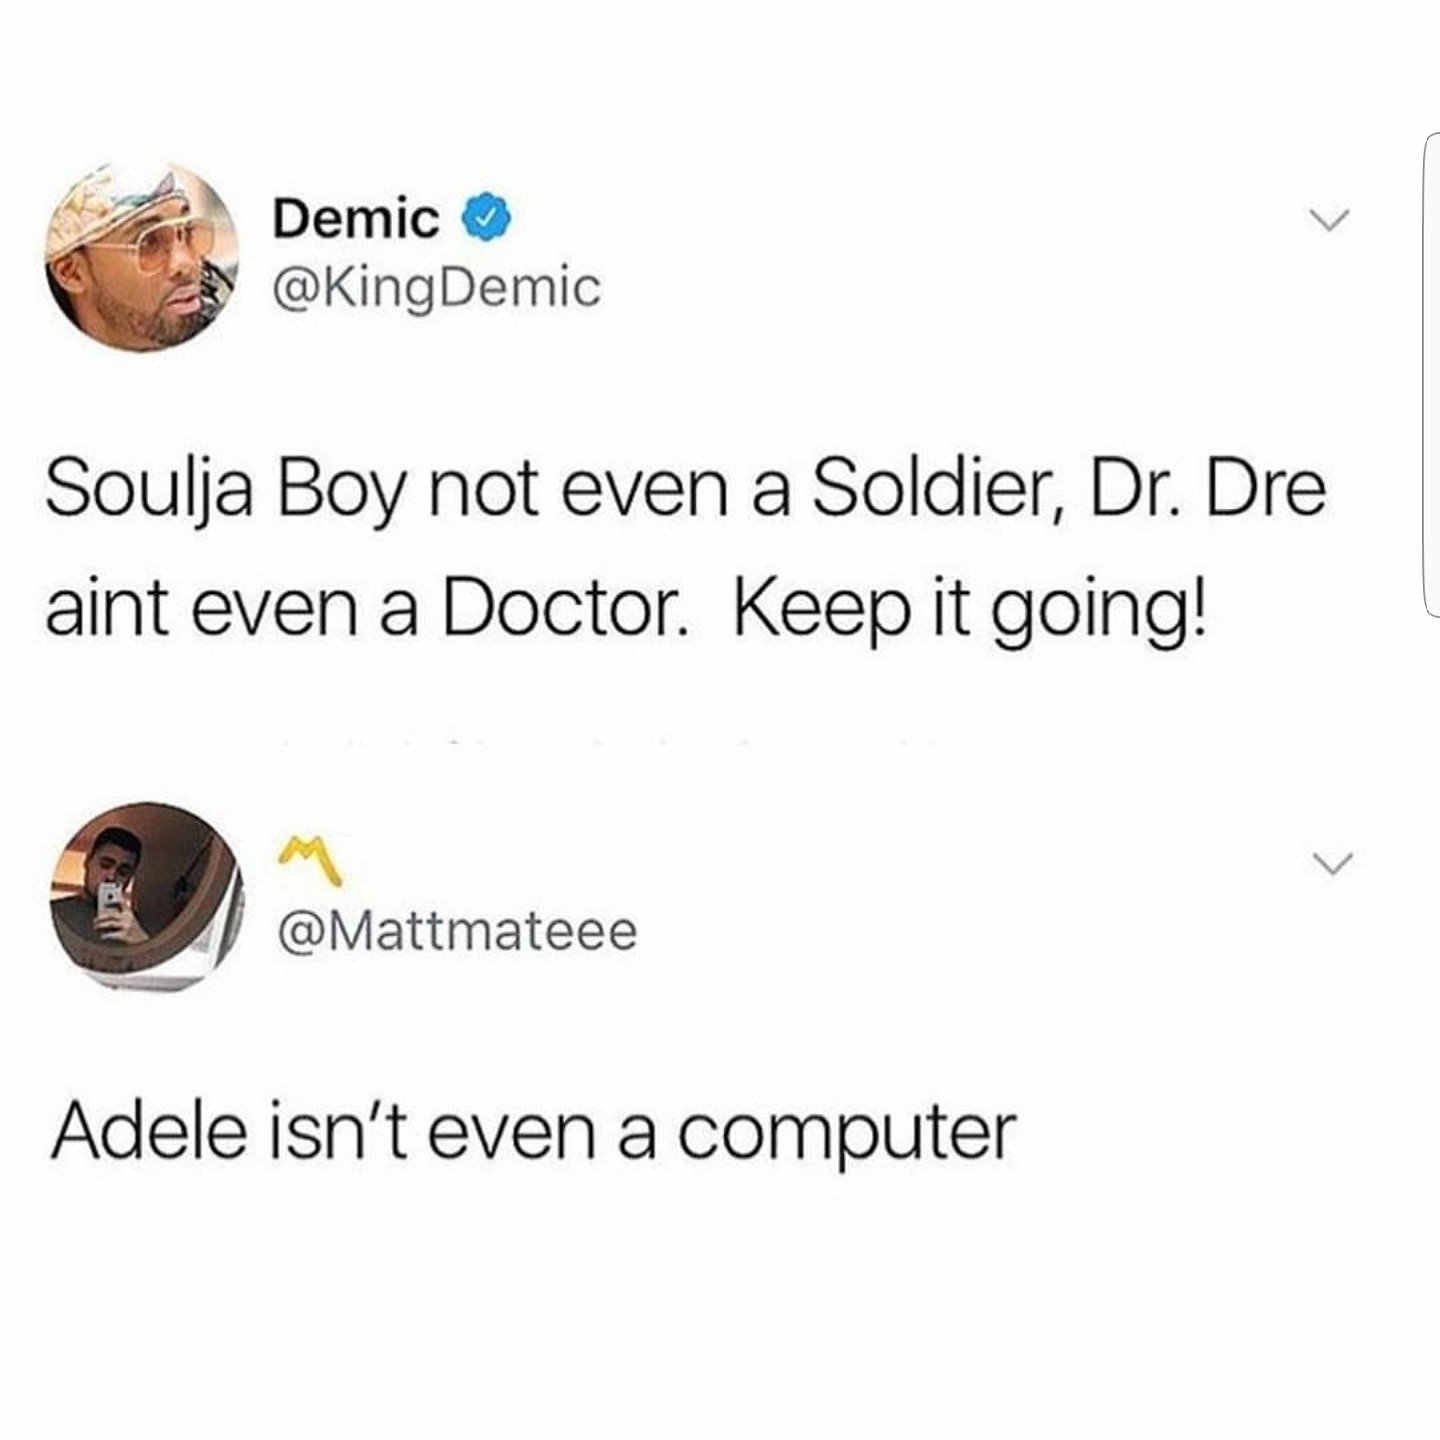 dr dre aint even a doctor - Demic Soulja Boy not even a Soldier, Dr. Dre aint even a Doctor. Keep it going! Adele isn't even a computer